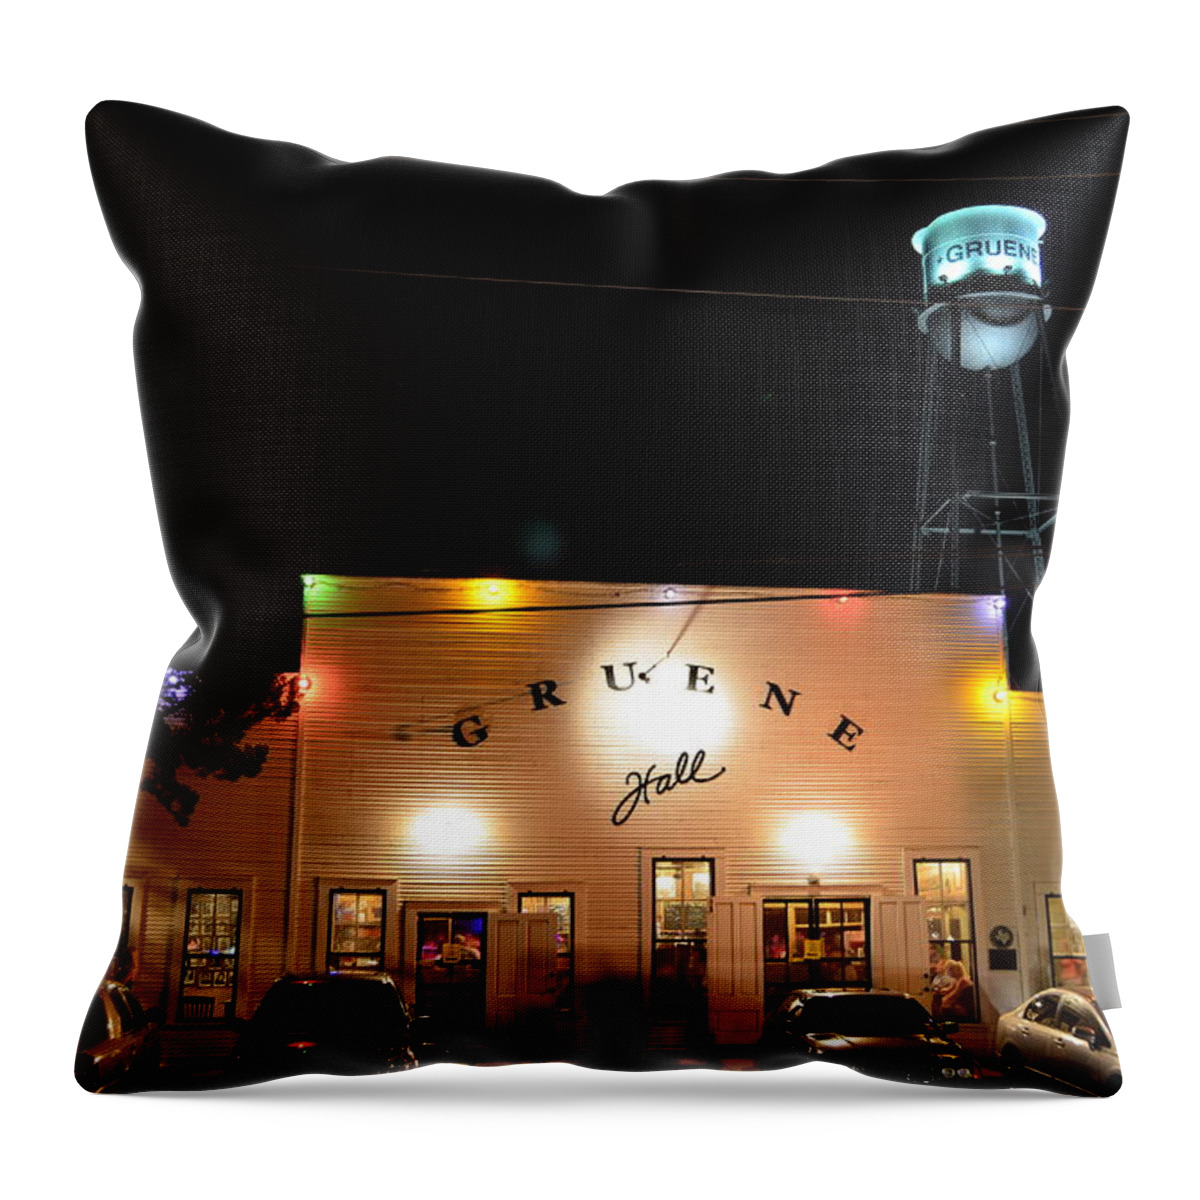 Timed Exposure Throw Pillow featuring the photograph Gruene Hall by David Morefield